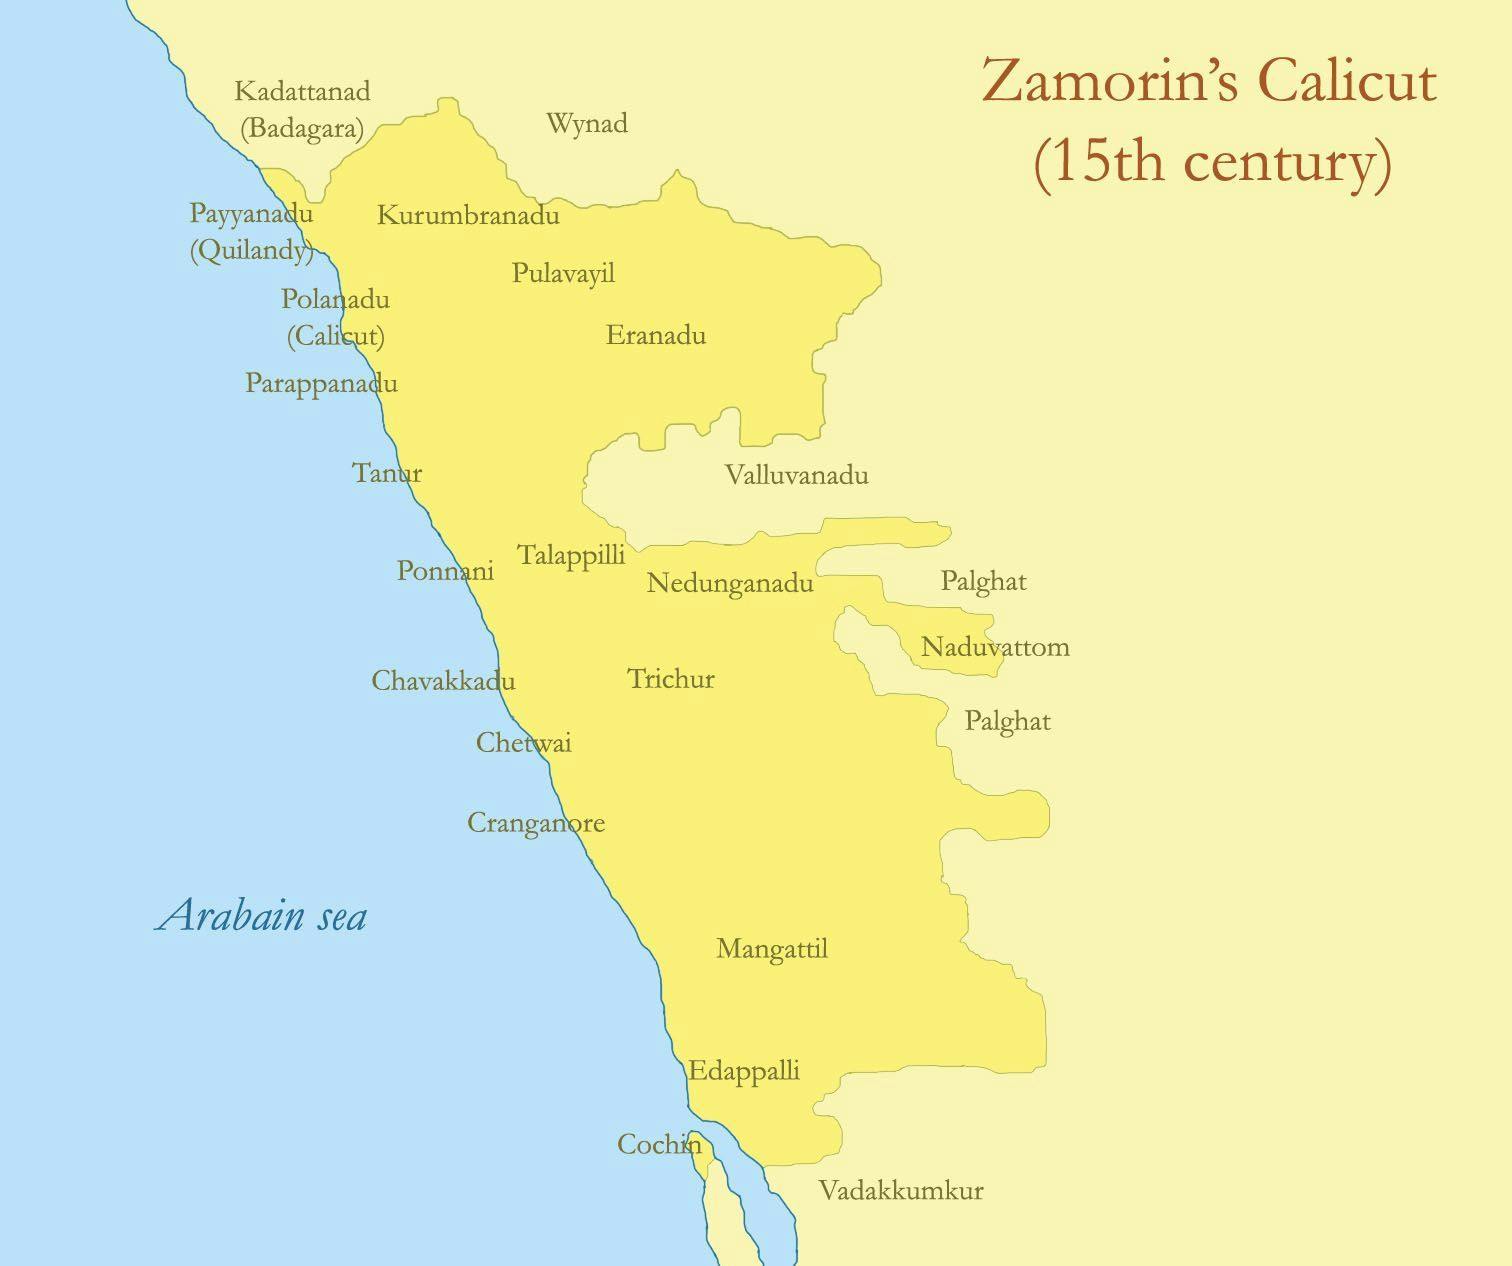 Extent of the Zamorin’s kingdom in 15th century